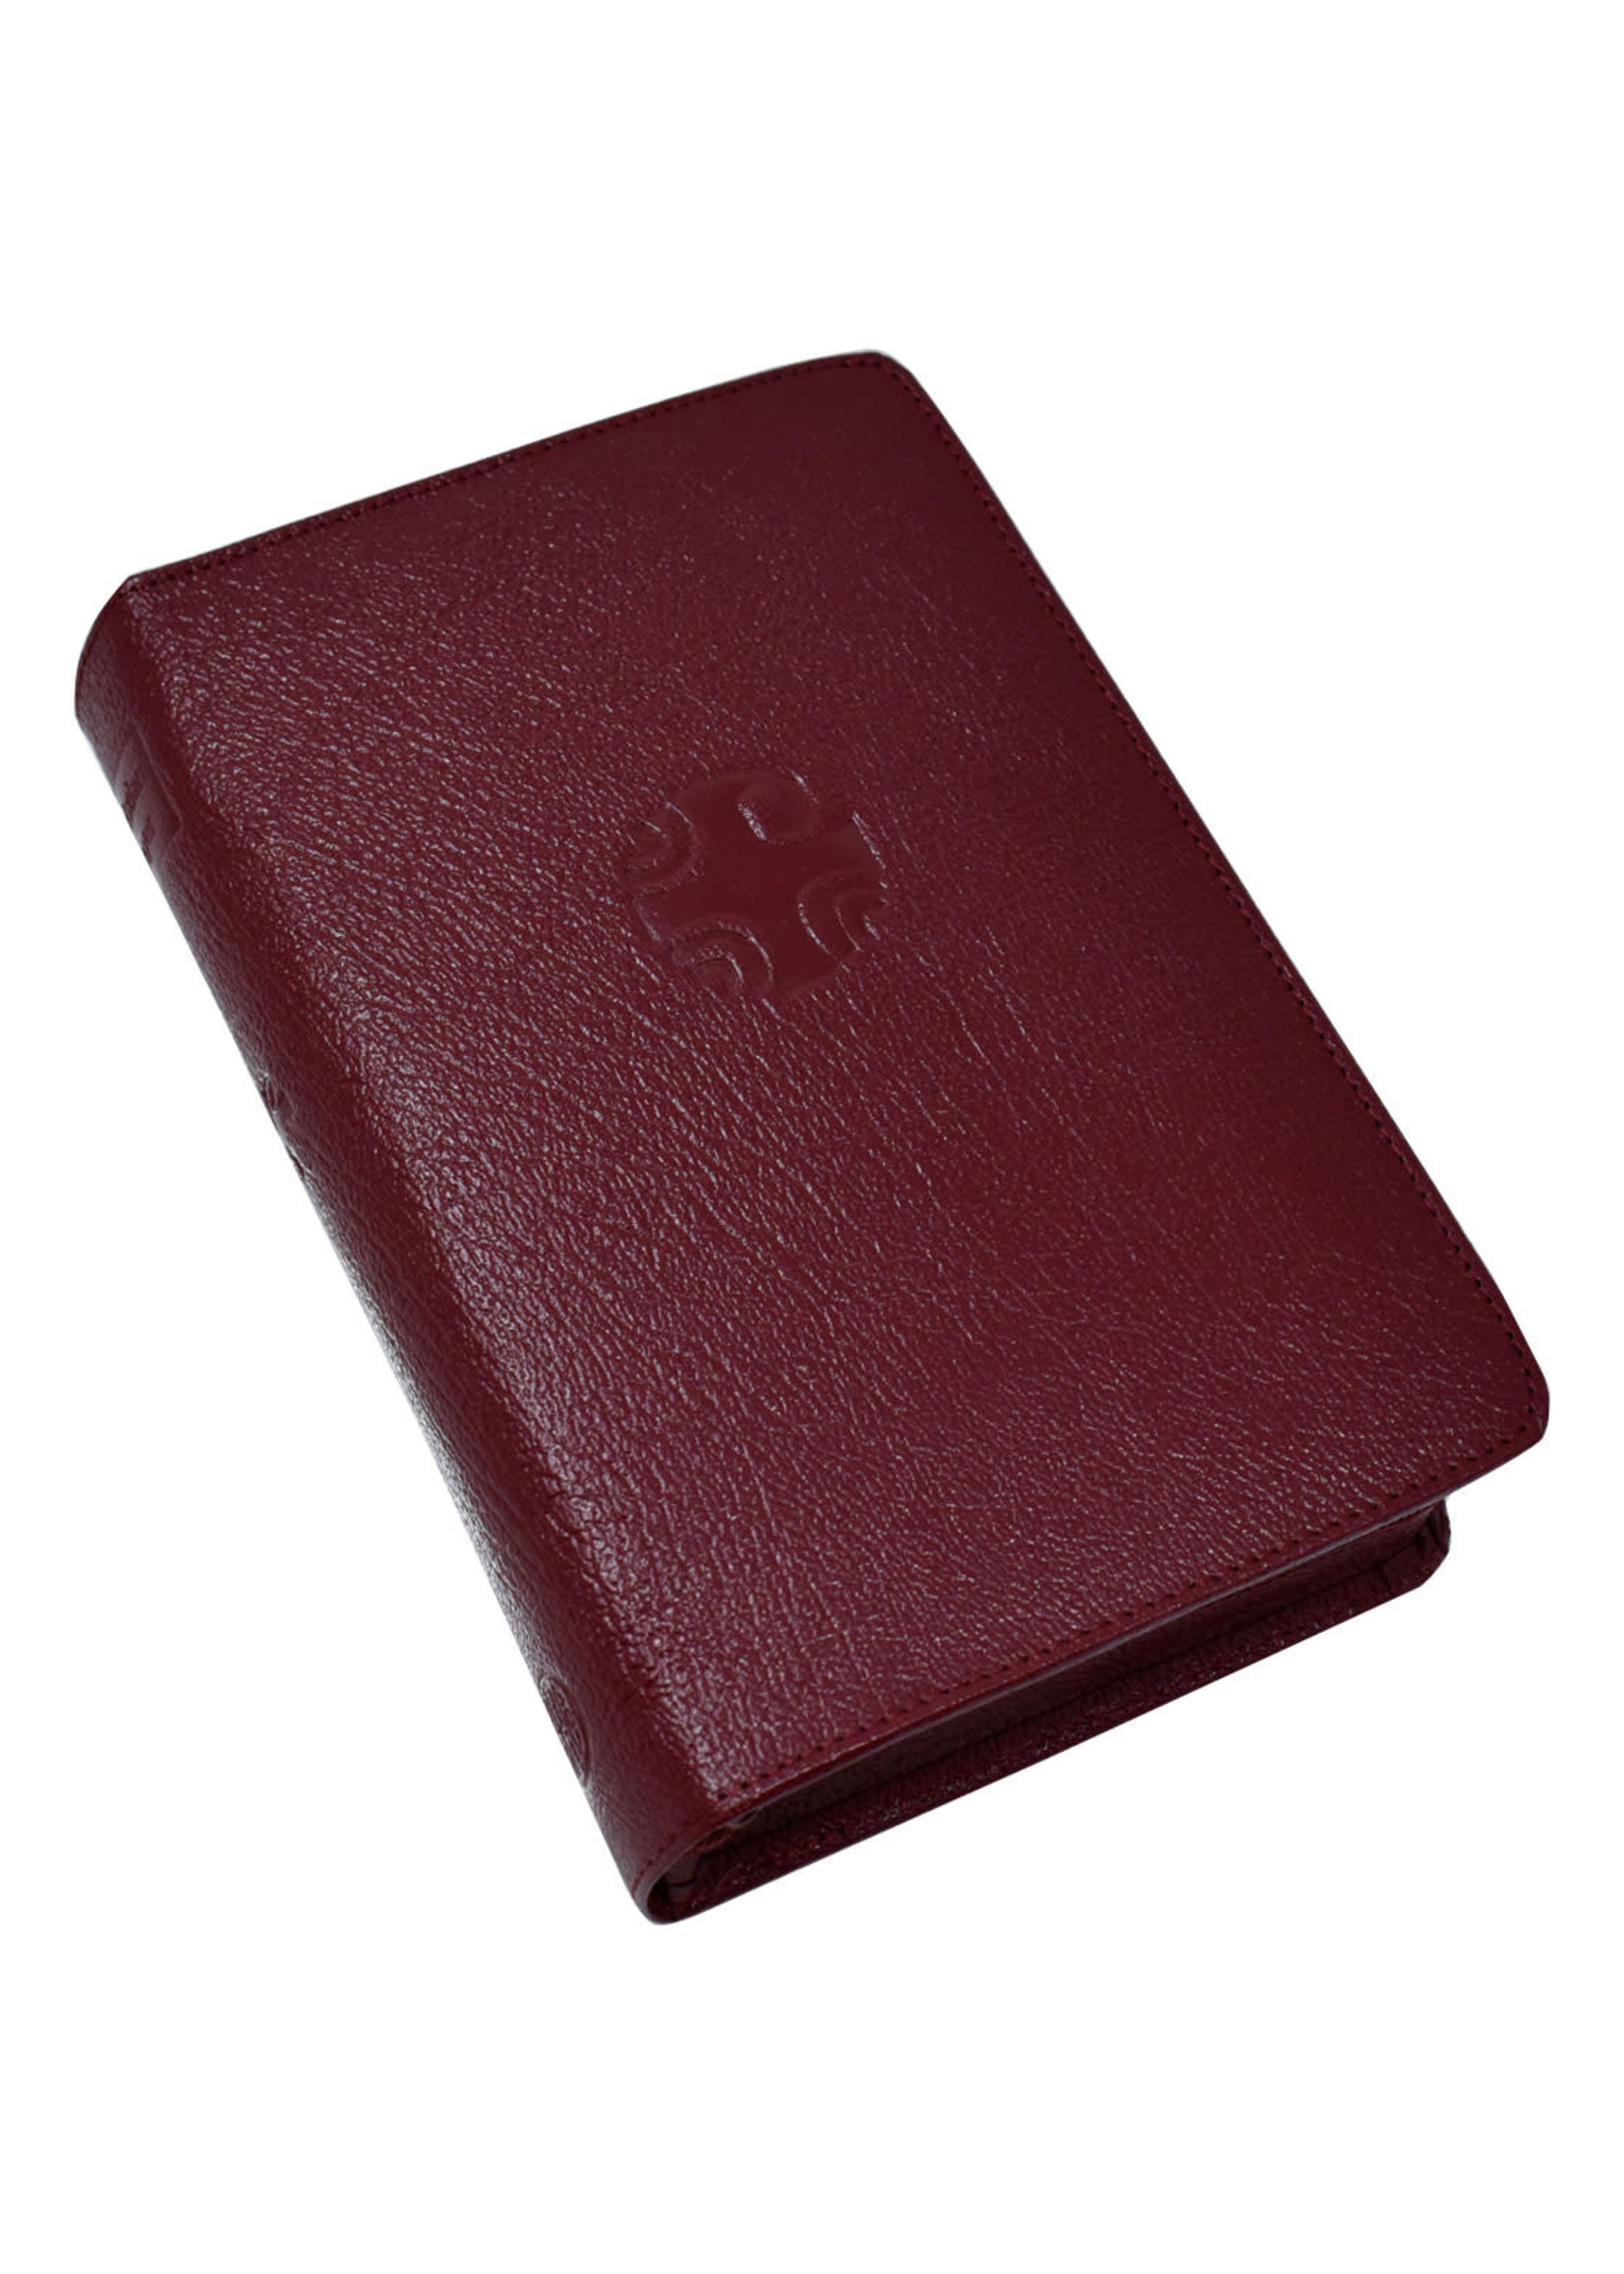 Large Type Christian Prayer Red Leather Zipper Case